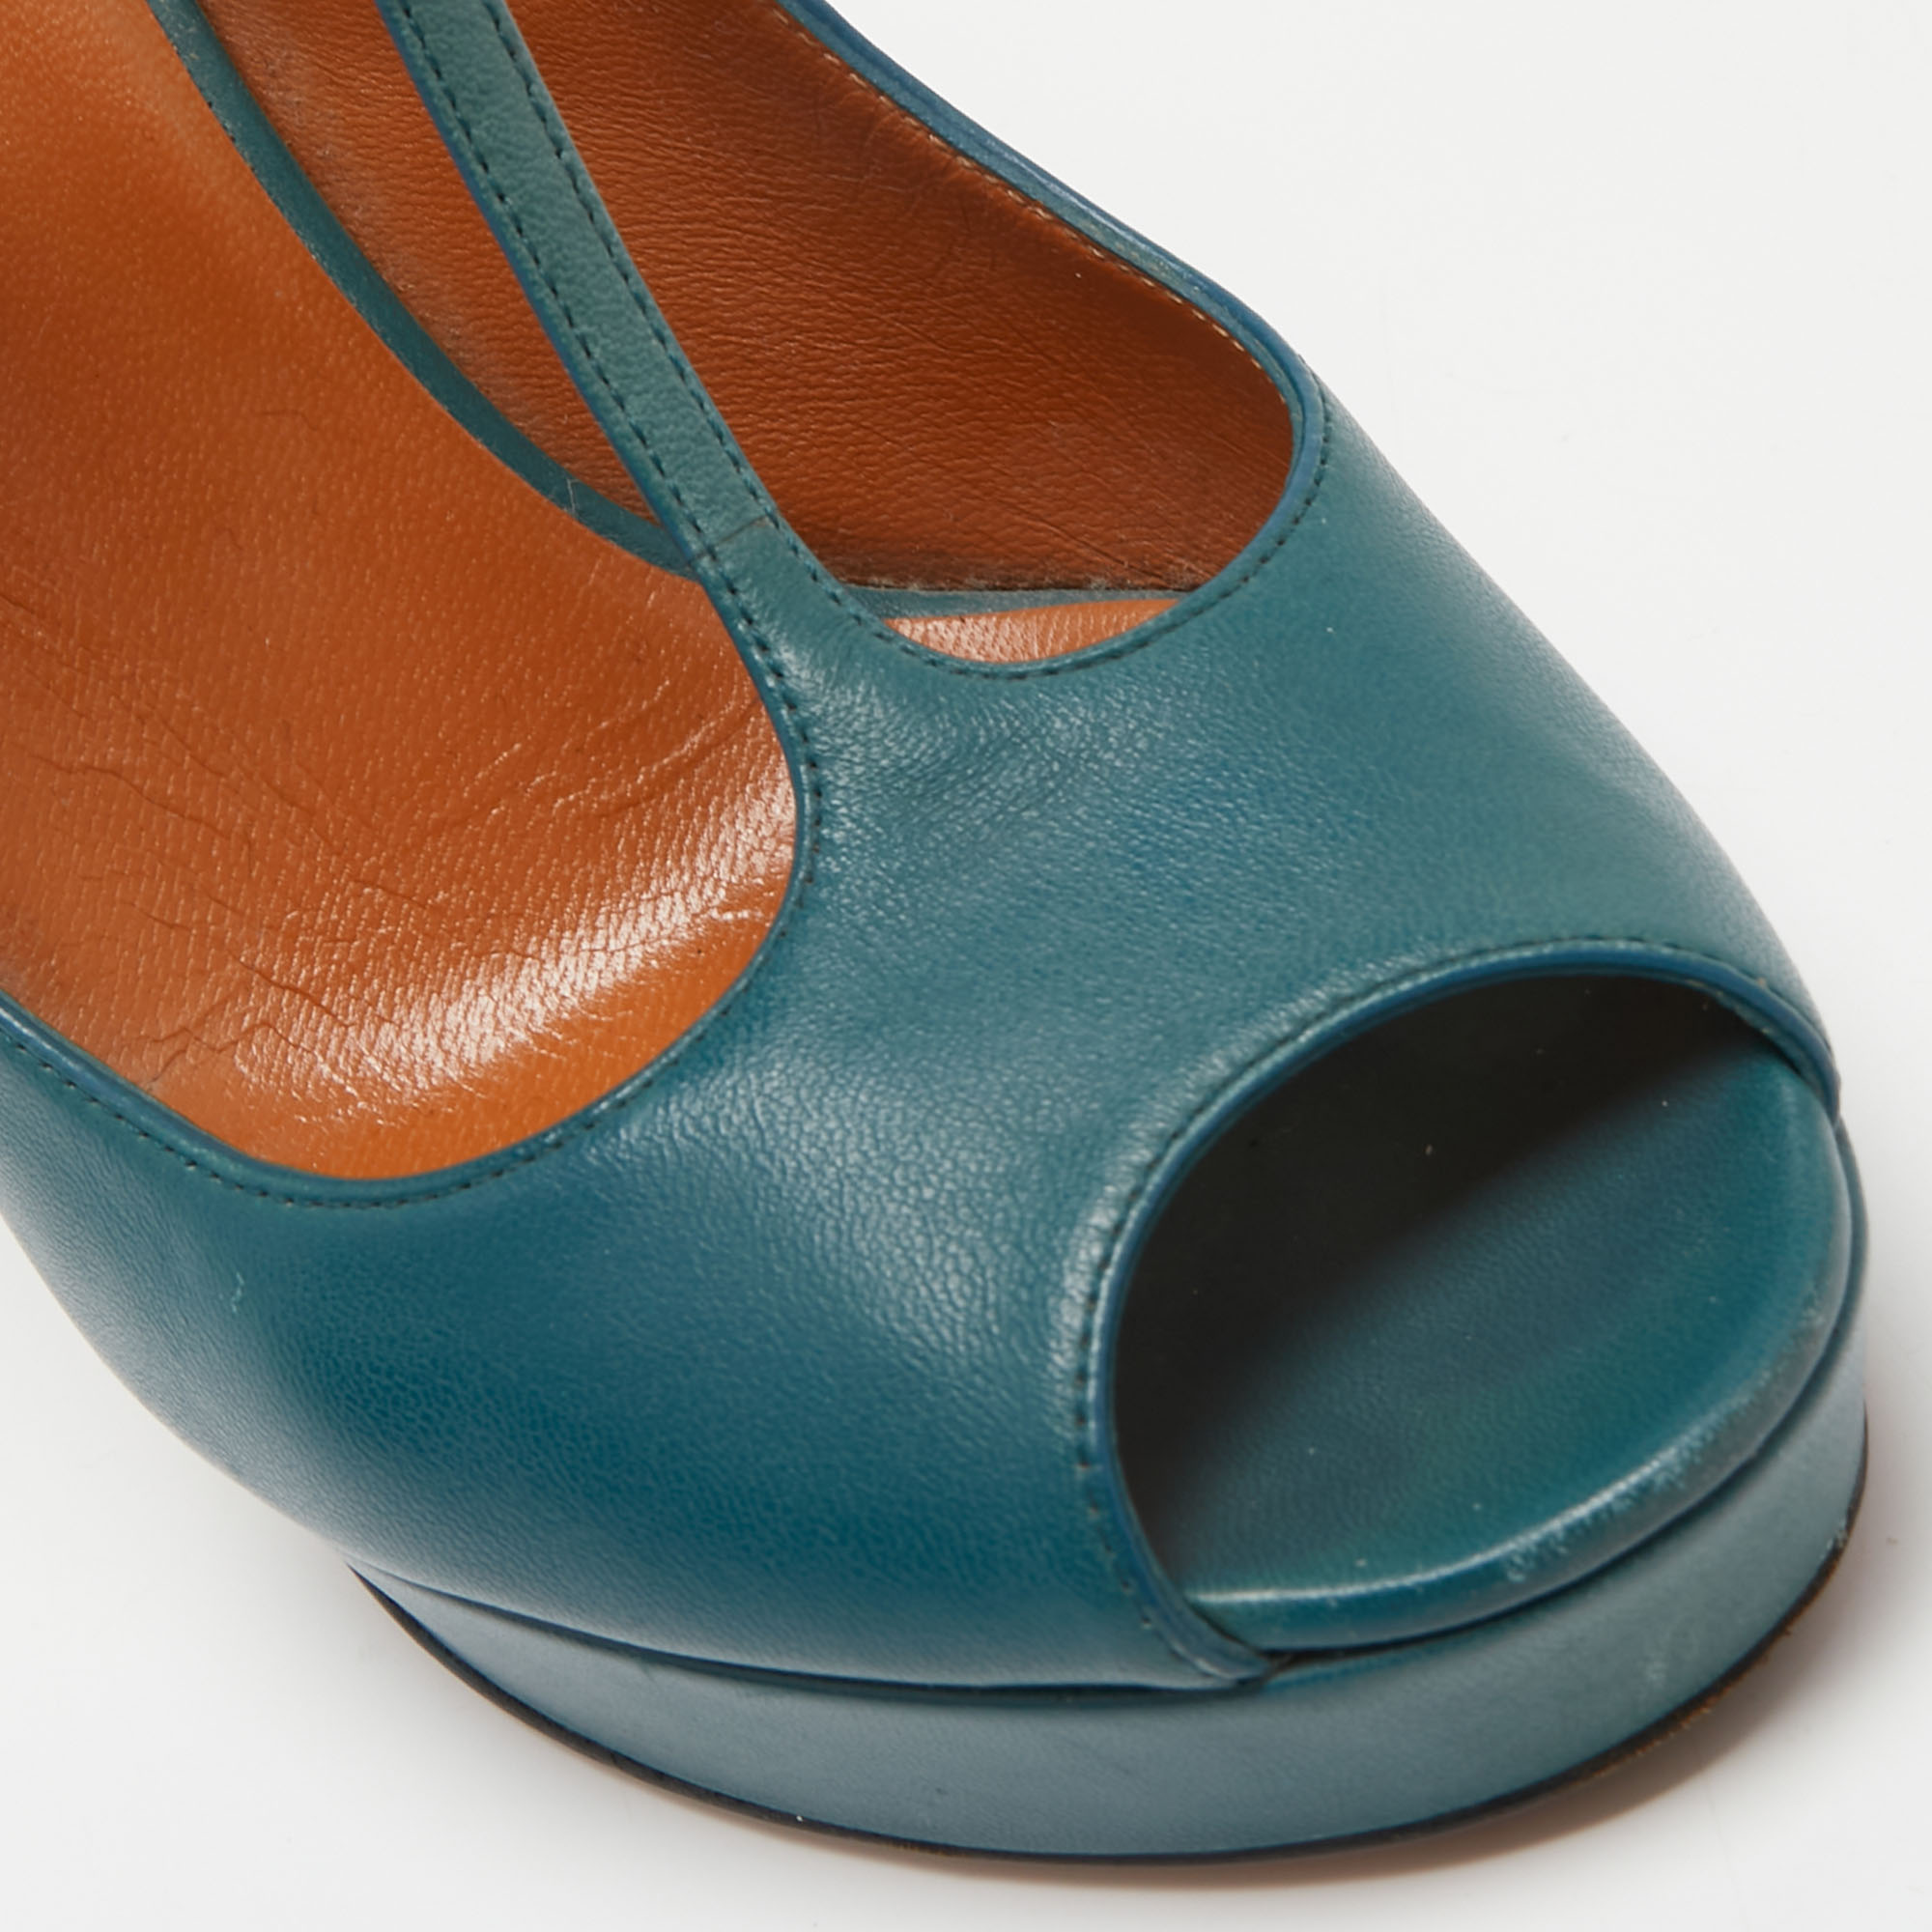 Gucci Teal Leather Betty T-Strap Platform Pumps Size 38